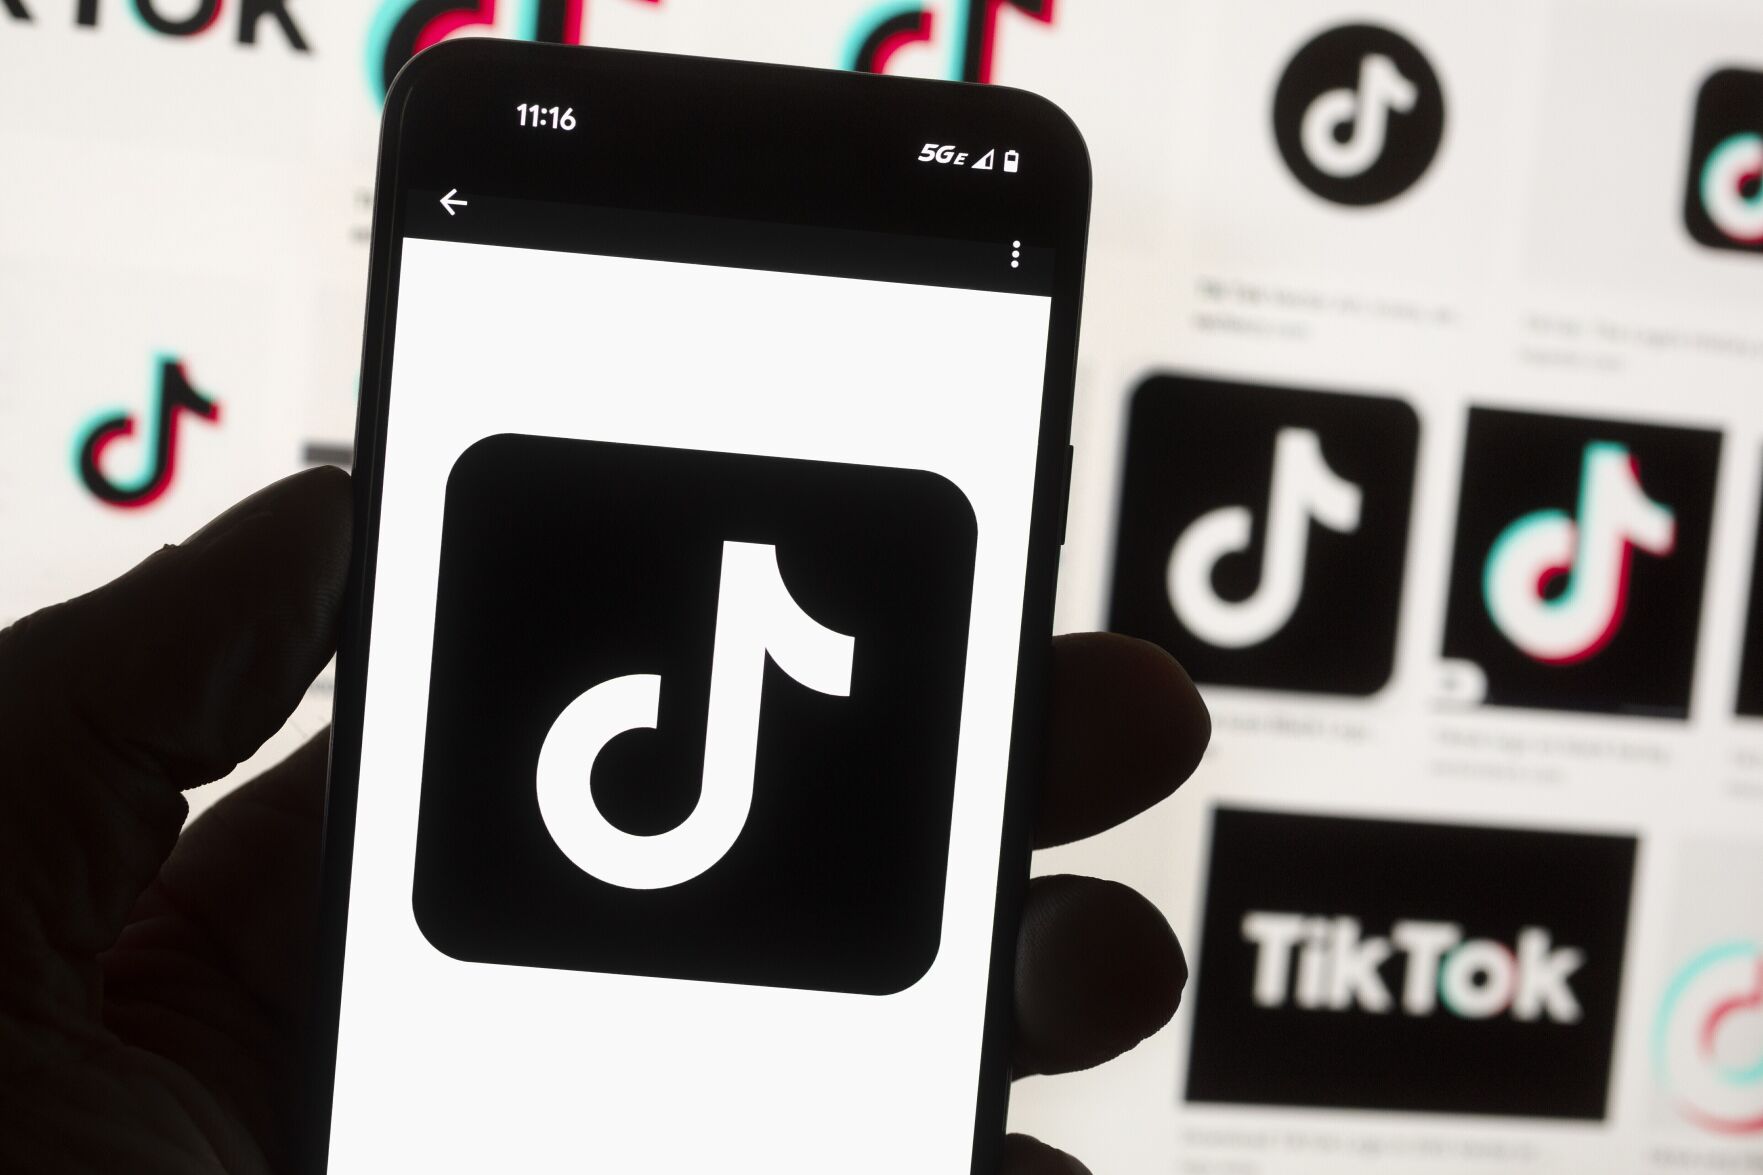 <p>FILE - The TikTok logo is displayed on a mobile phone in front of a computer screen, Oct. 14, 2022, in Boston. TikTok is gearing up for a legal fight against a U.S. law that would force the social media platform to break ties with its China-based parent company or face a ban. A battle in the courts will almost certainly be backed by Chinese authorities as the bitter U.S.-China rivalry threatens the future of a wildly popular way for young Americans to connect online. (AP Photo/Michael Dwyer, File)</p>   PHOTO CREDIT: Michael Dwyer - staff, ASSOCIATED PRESS